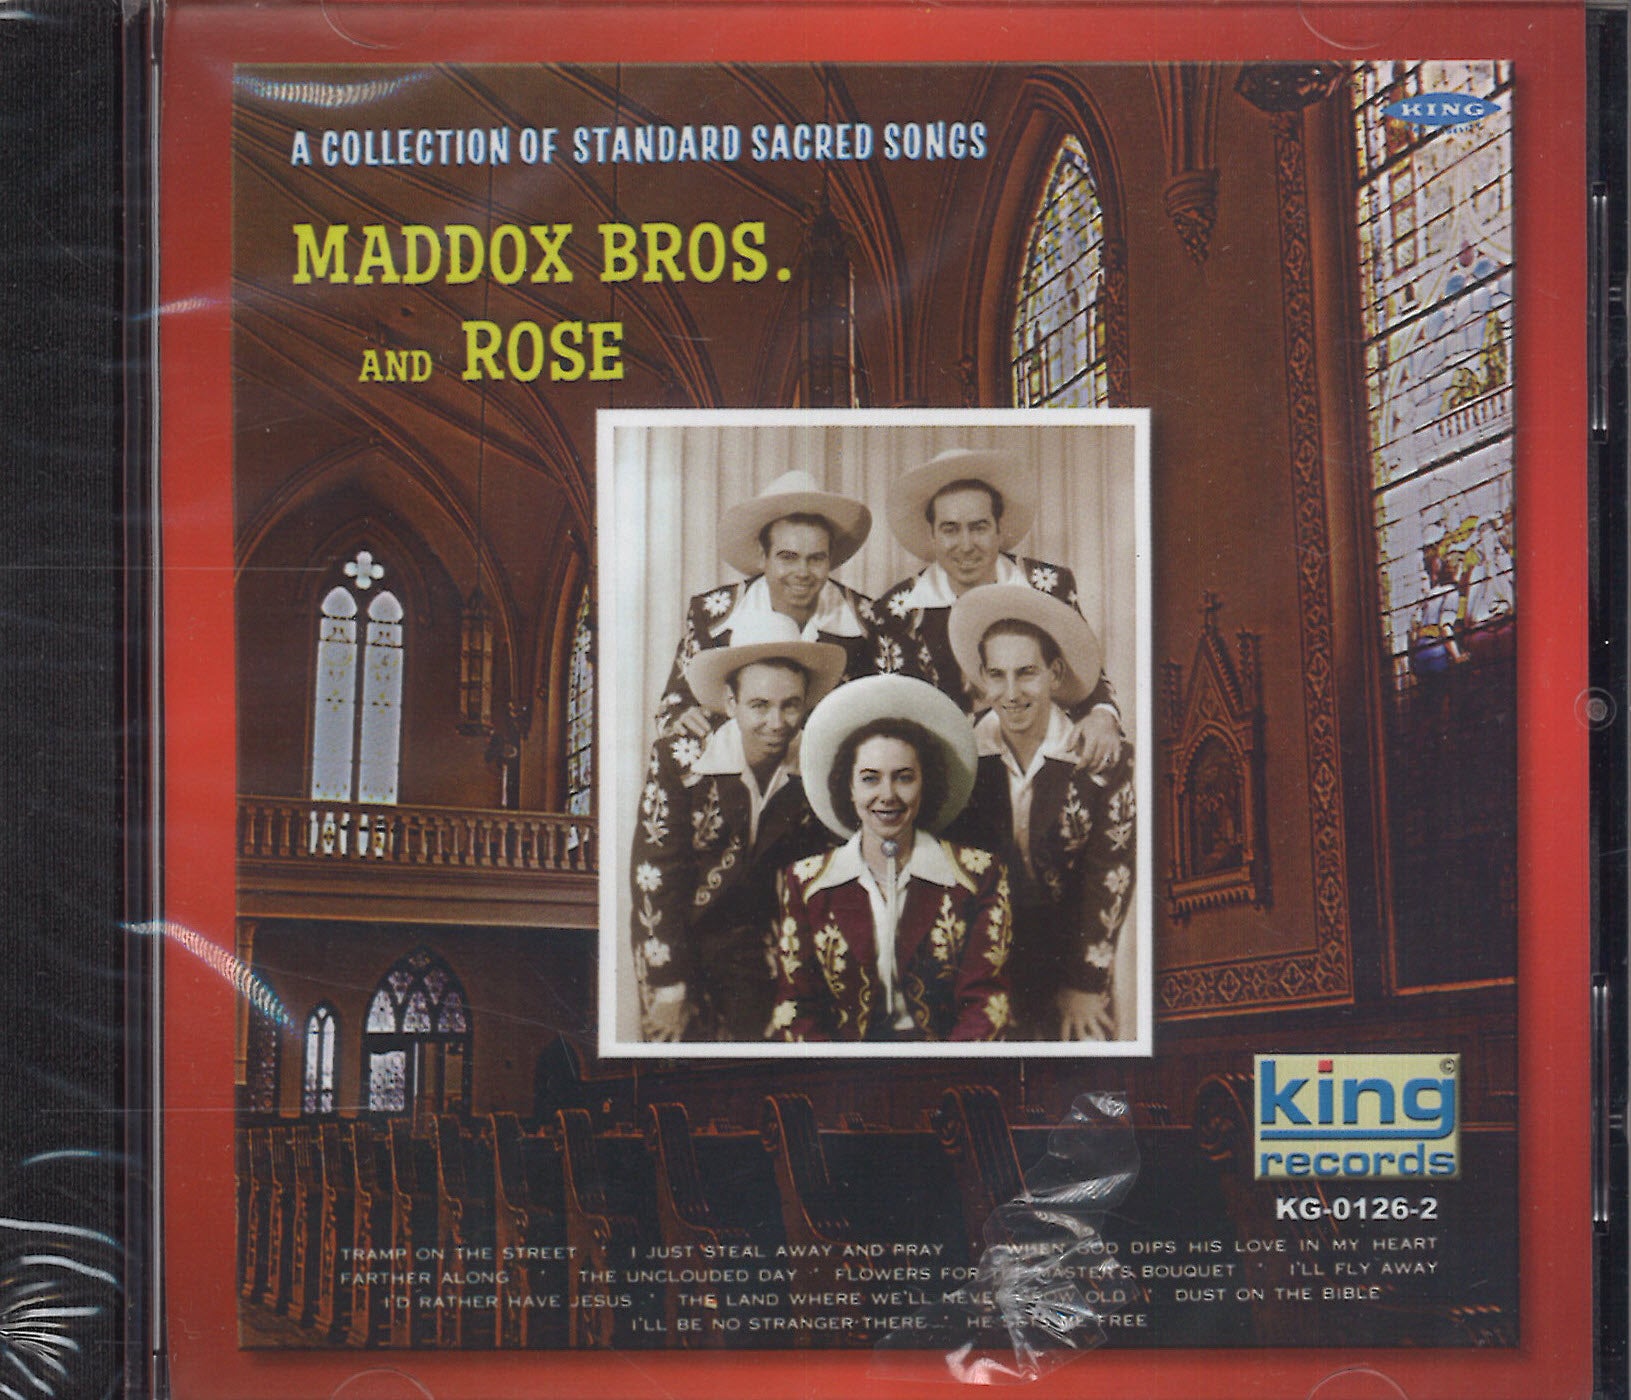 Maddox Bros & Rose Collection Of Standard Sacred Songs CD